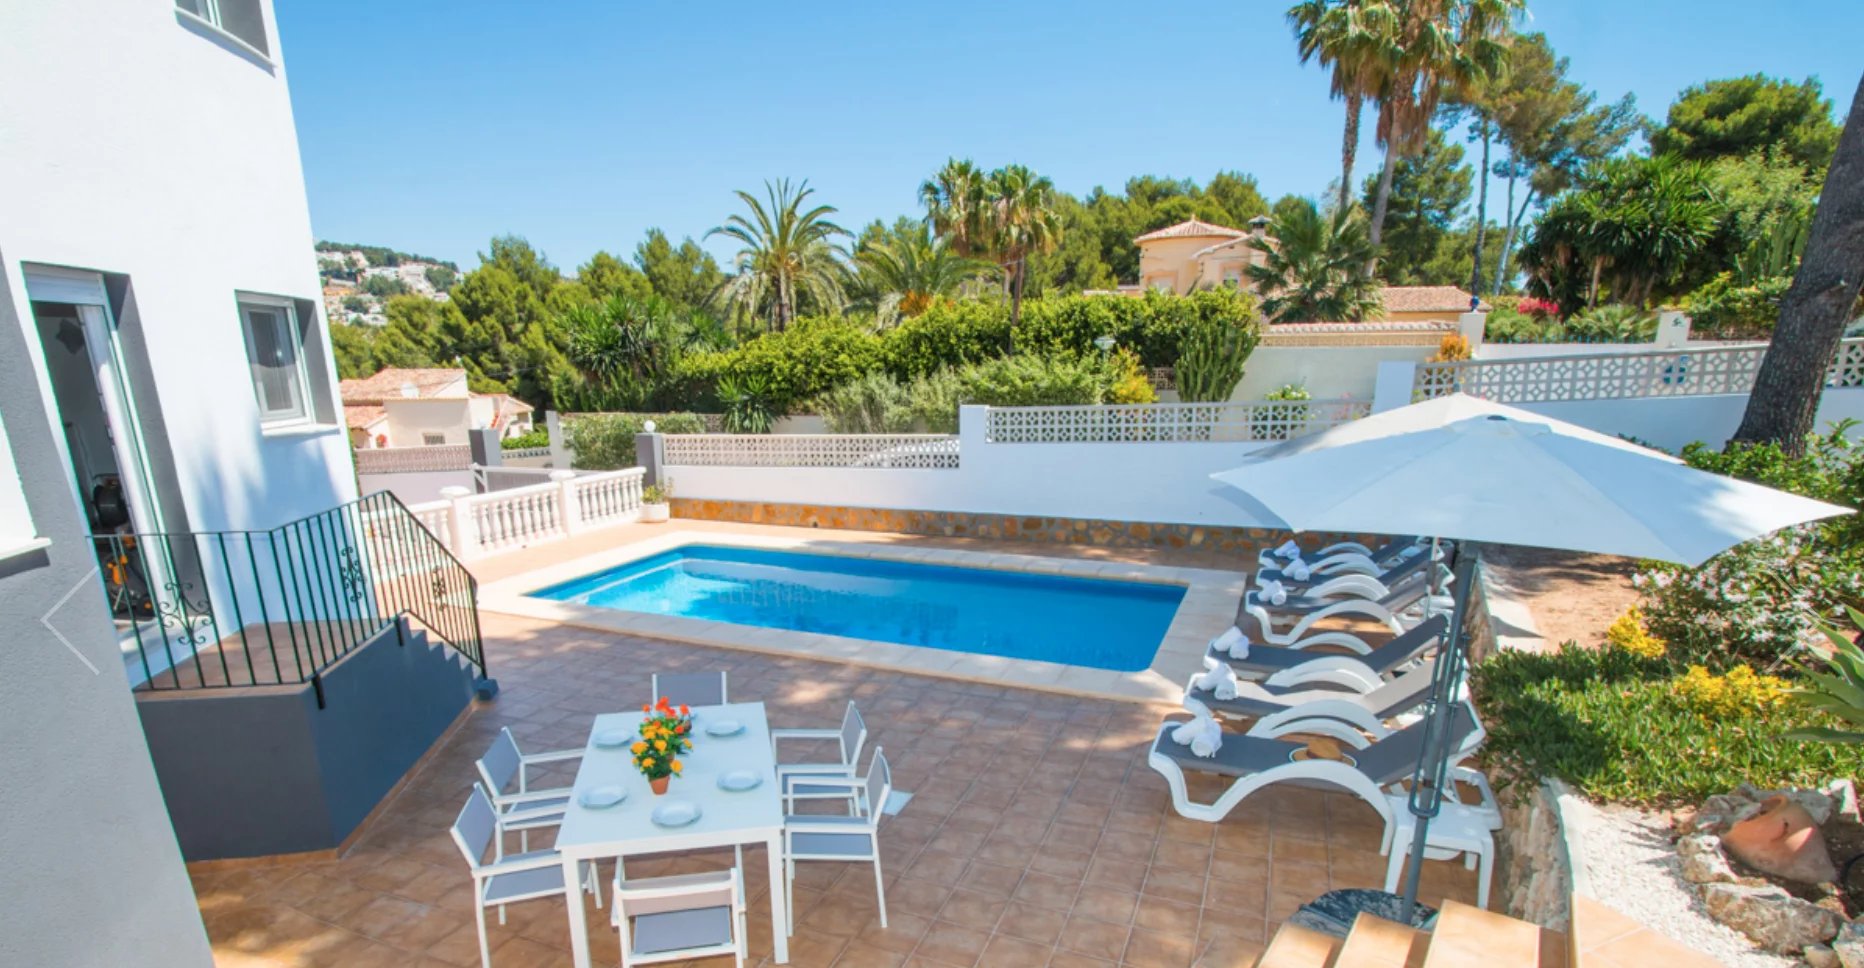 Large villa with 3 accommodations and 2 private pools for sale in San Jaime